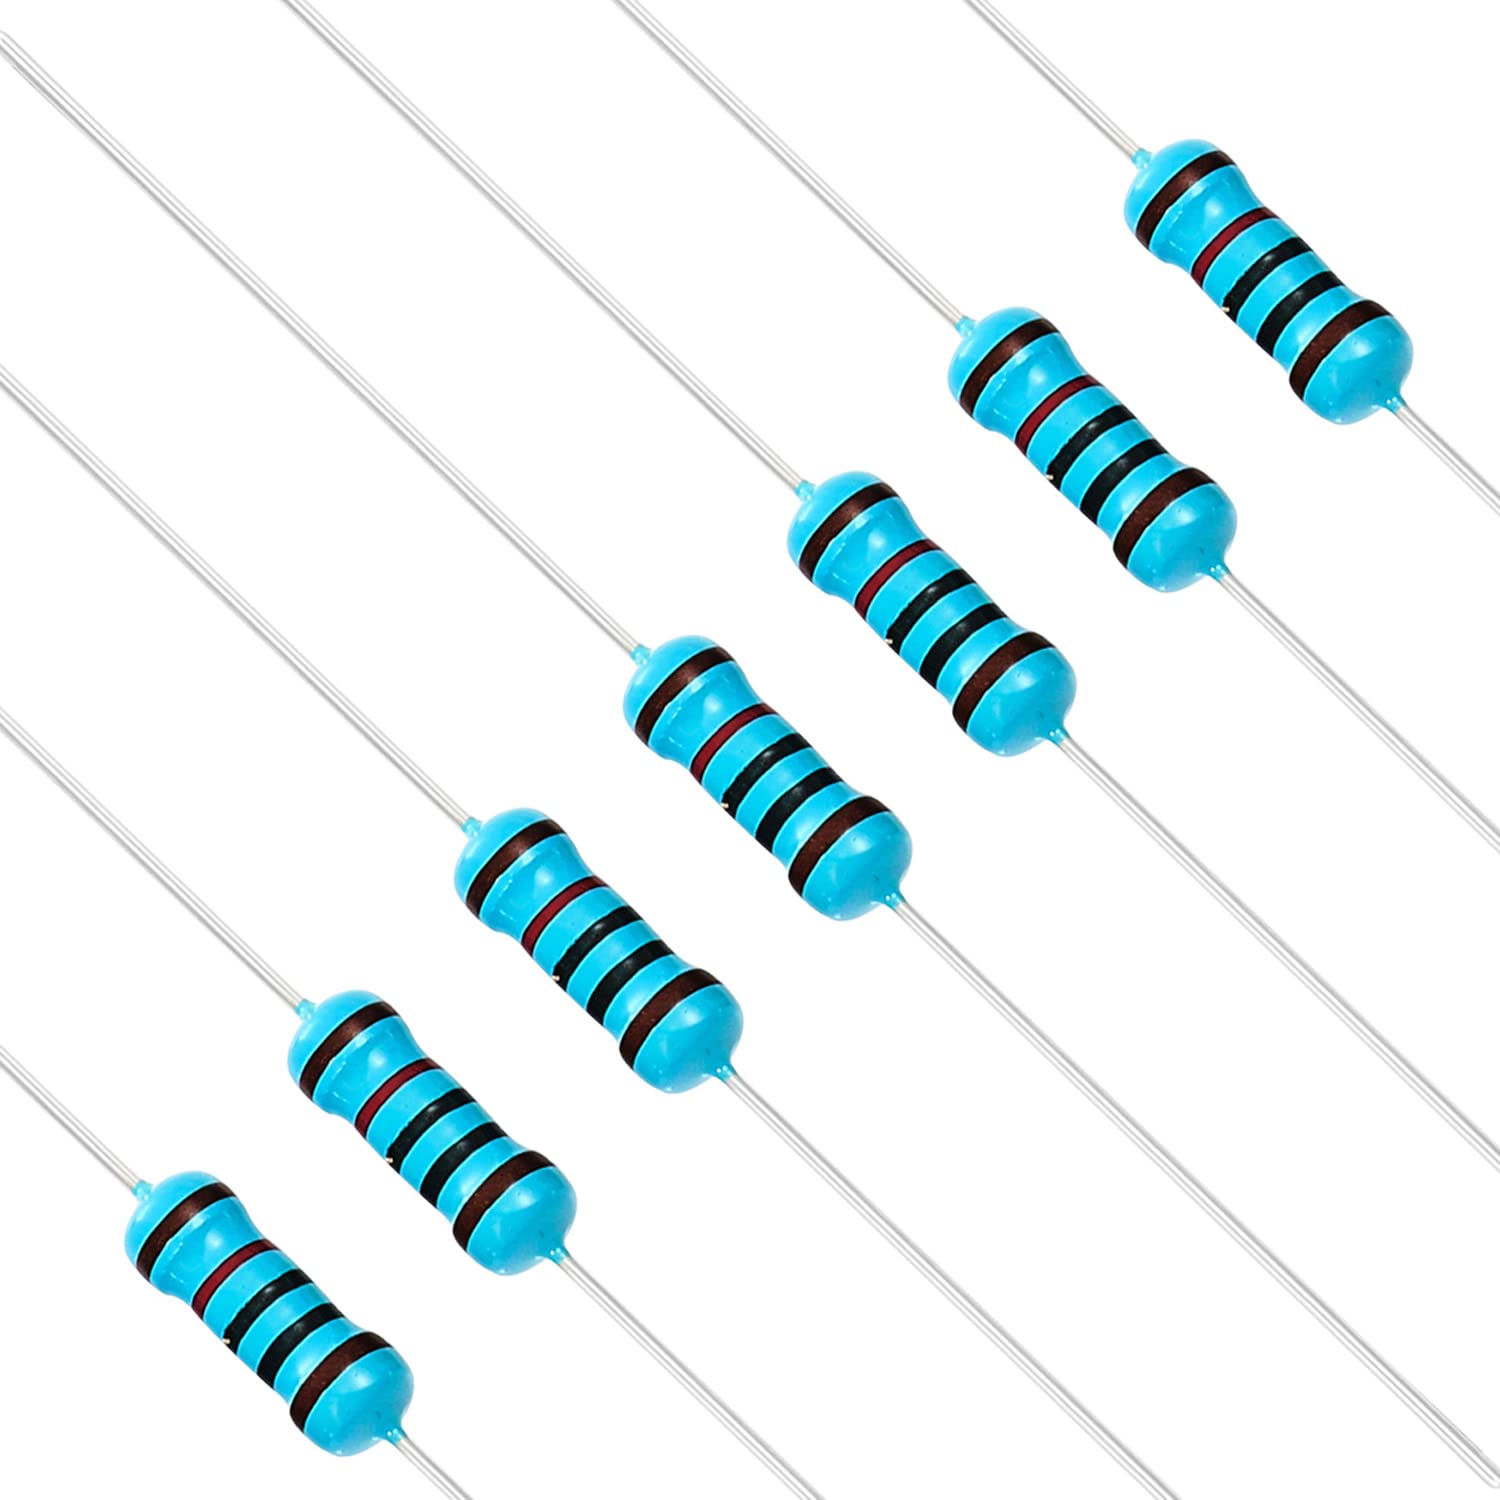 Chanzon 100pcs 1/2W (0.5W) 10K Ω ohm Metal Film Fixed Resistor 0.01 ±1% Tolerance 10KR MF Through Hole Resistors Current Limiting Rohs Certificated